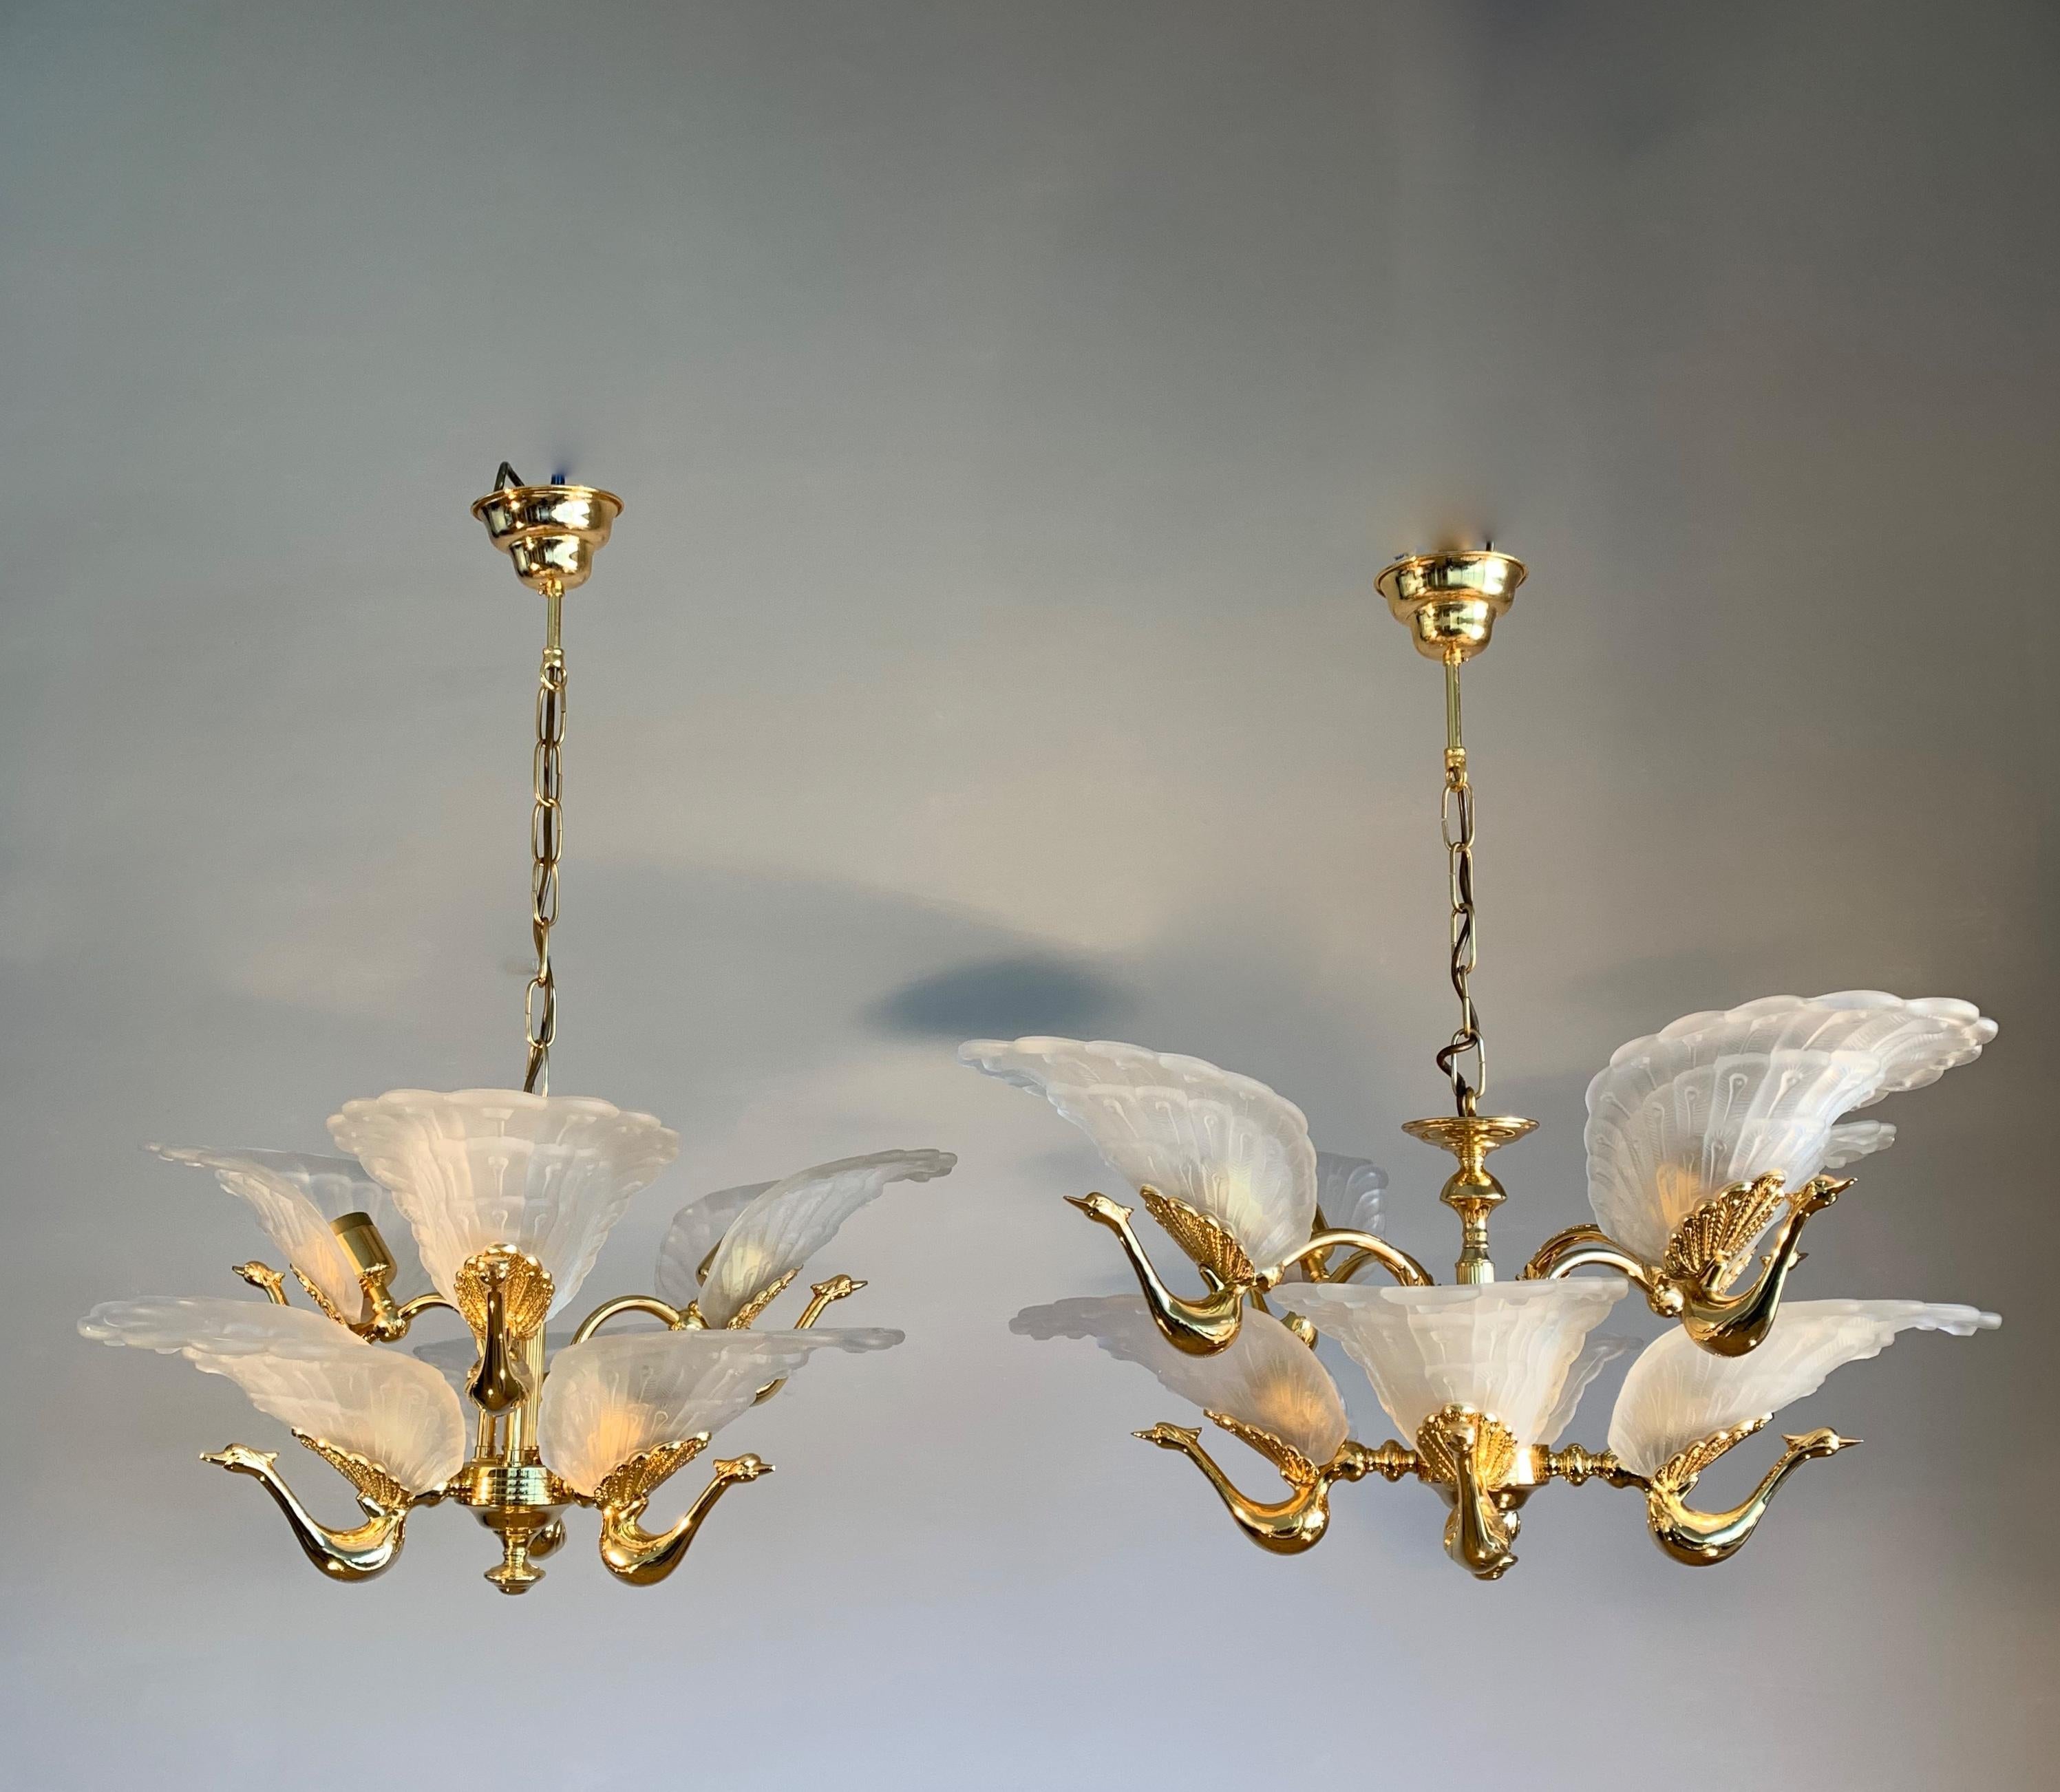 20th Century Mid-Century Modern Wall Sconce w. Golden Bronze Peacock Sculptures & Glass Wings